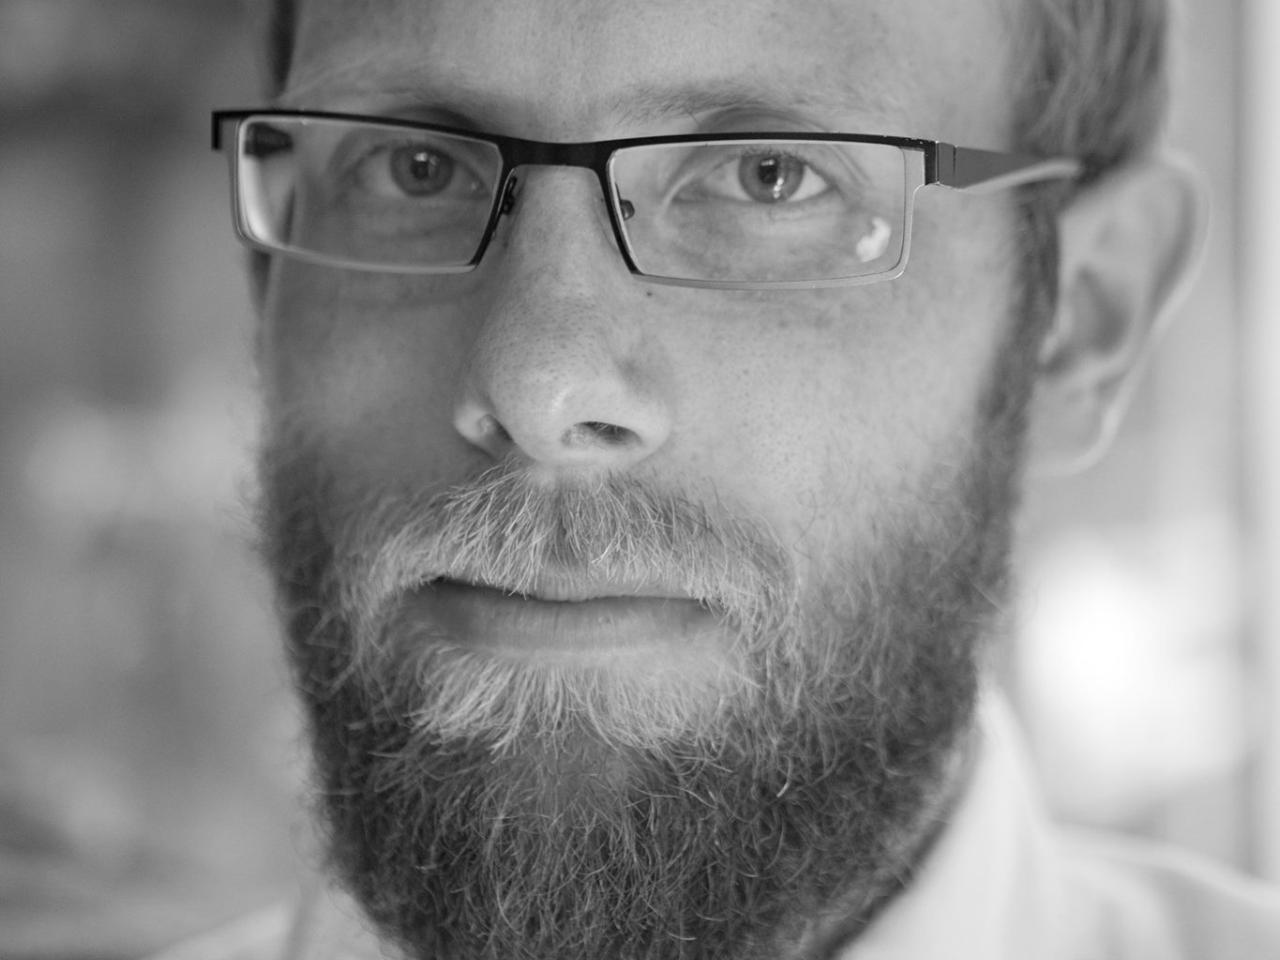 A black and white headshot of New Day filmmaker Christian Jensen. He wears square glasses and a collared shirt and looks into the camera with a serious expression.